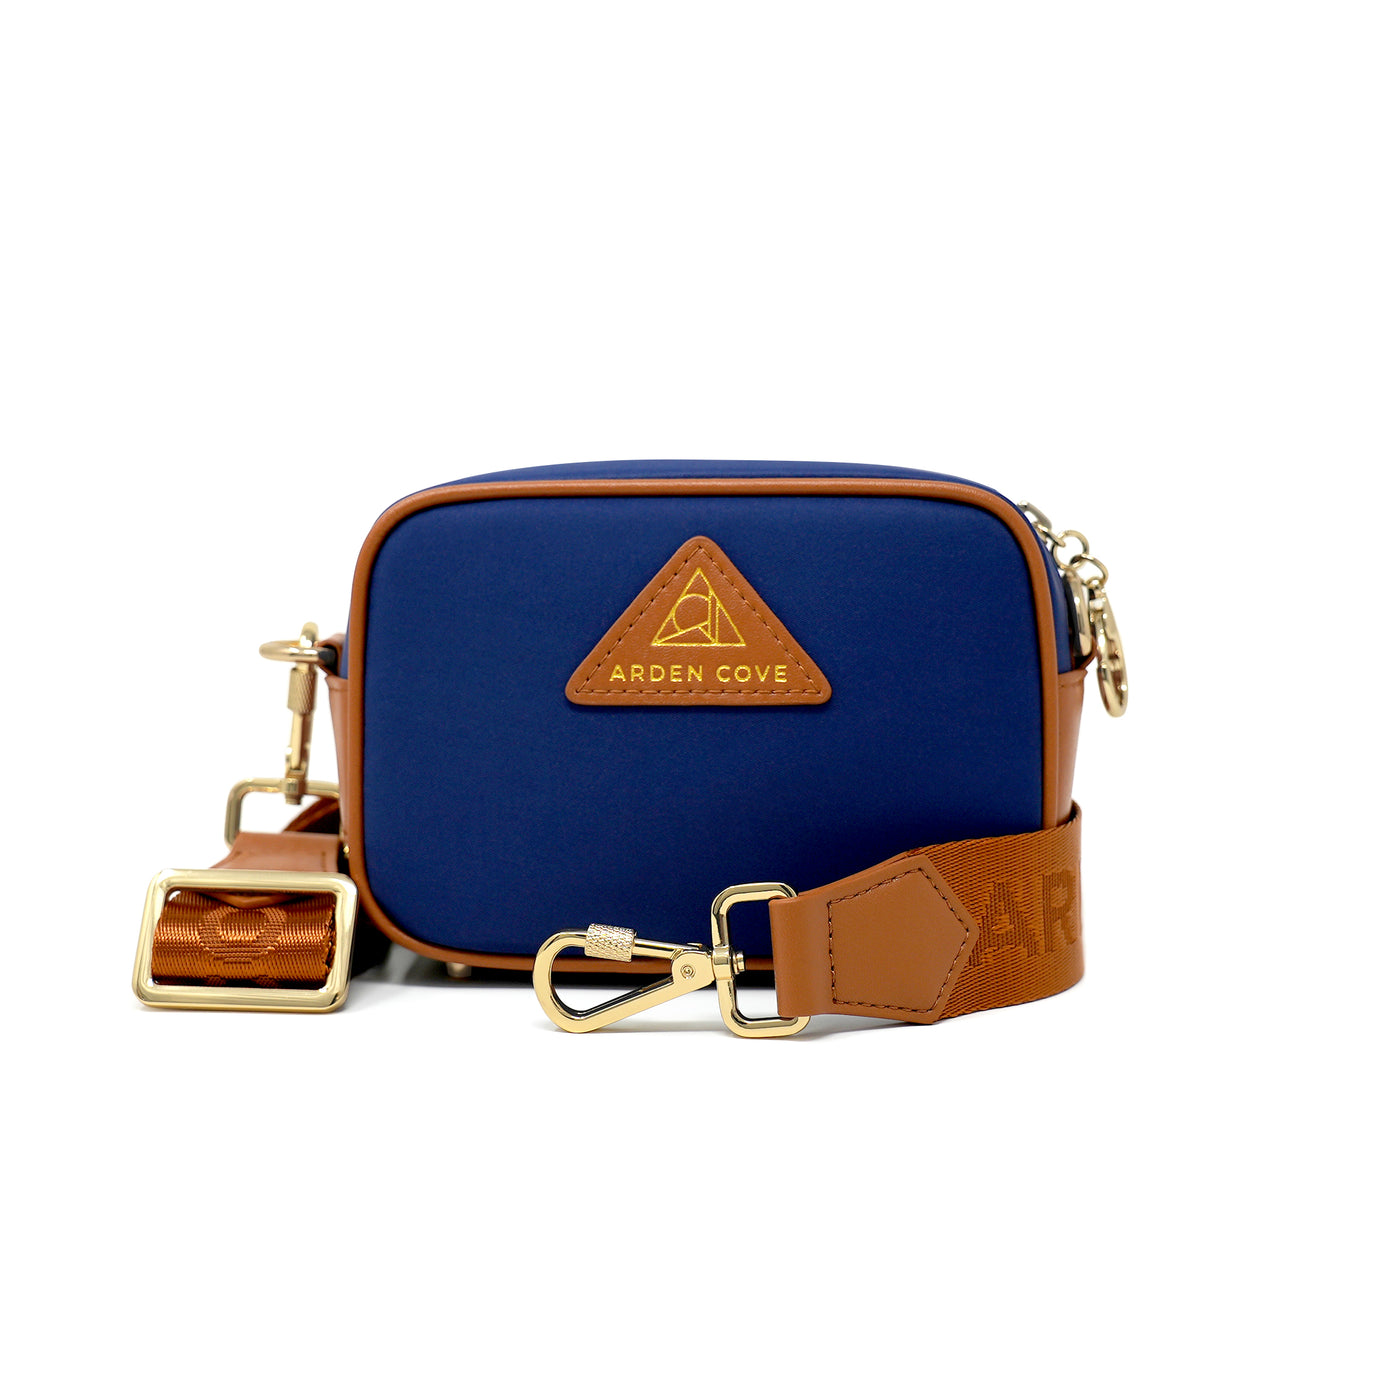 Anti-theft Water-resistant Travel Crossbody - Crissy Mini Crossbody in Navy Gold with nylon jacquard & locking clasps straps - front view - Arden Cove